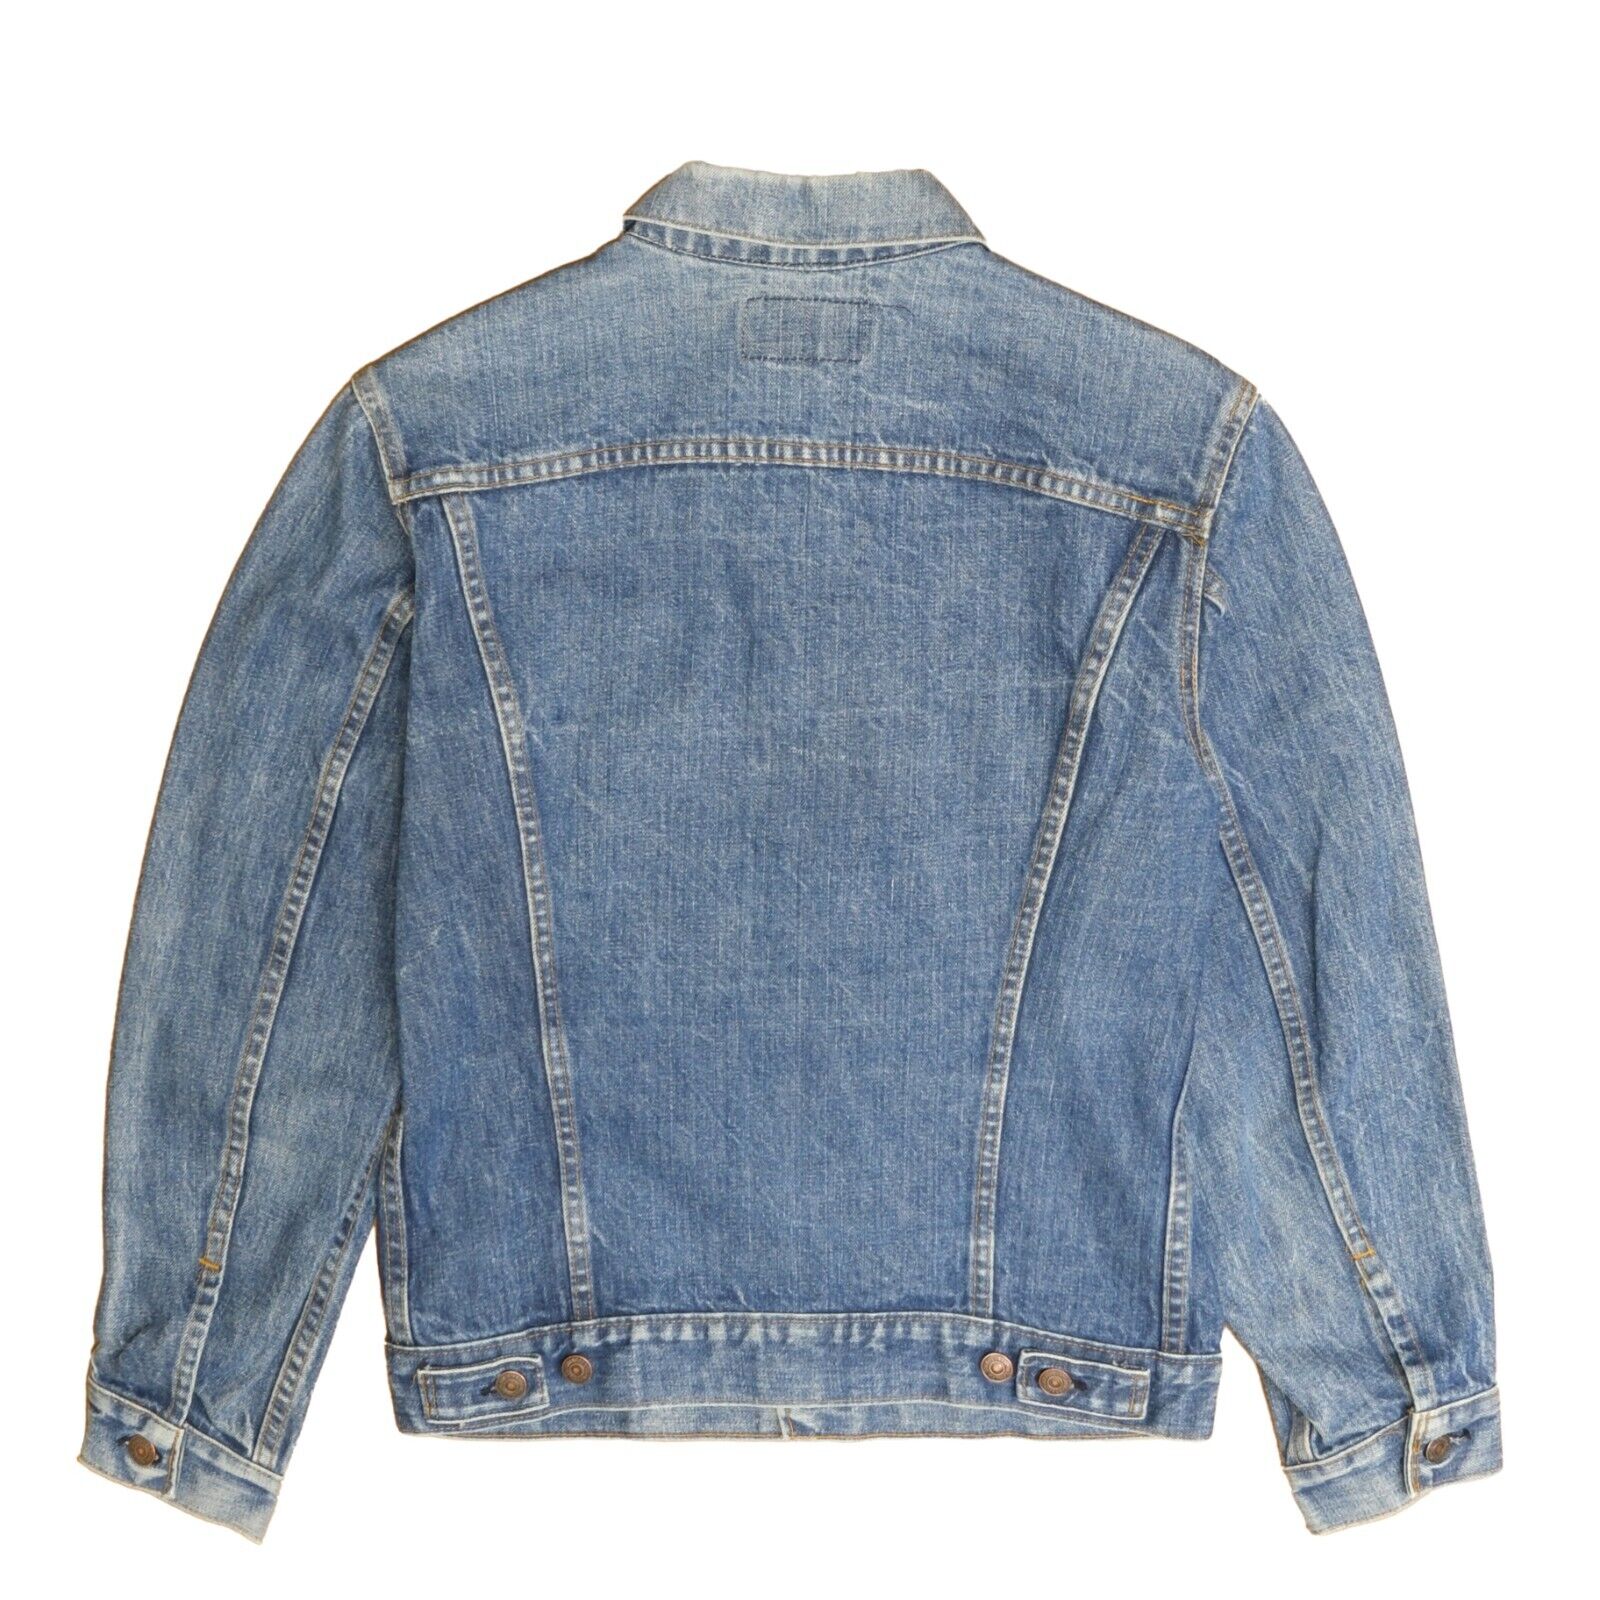 Misses small 4-6 Denim Jacket Vintage Levi Strauss Signature Classic Style  Light Weight Ships free